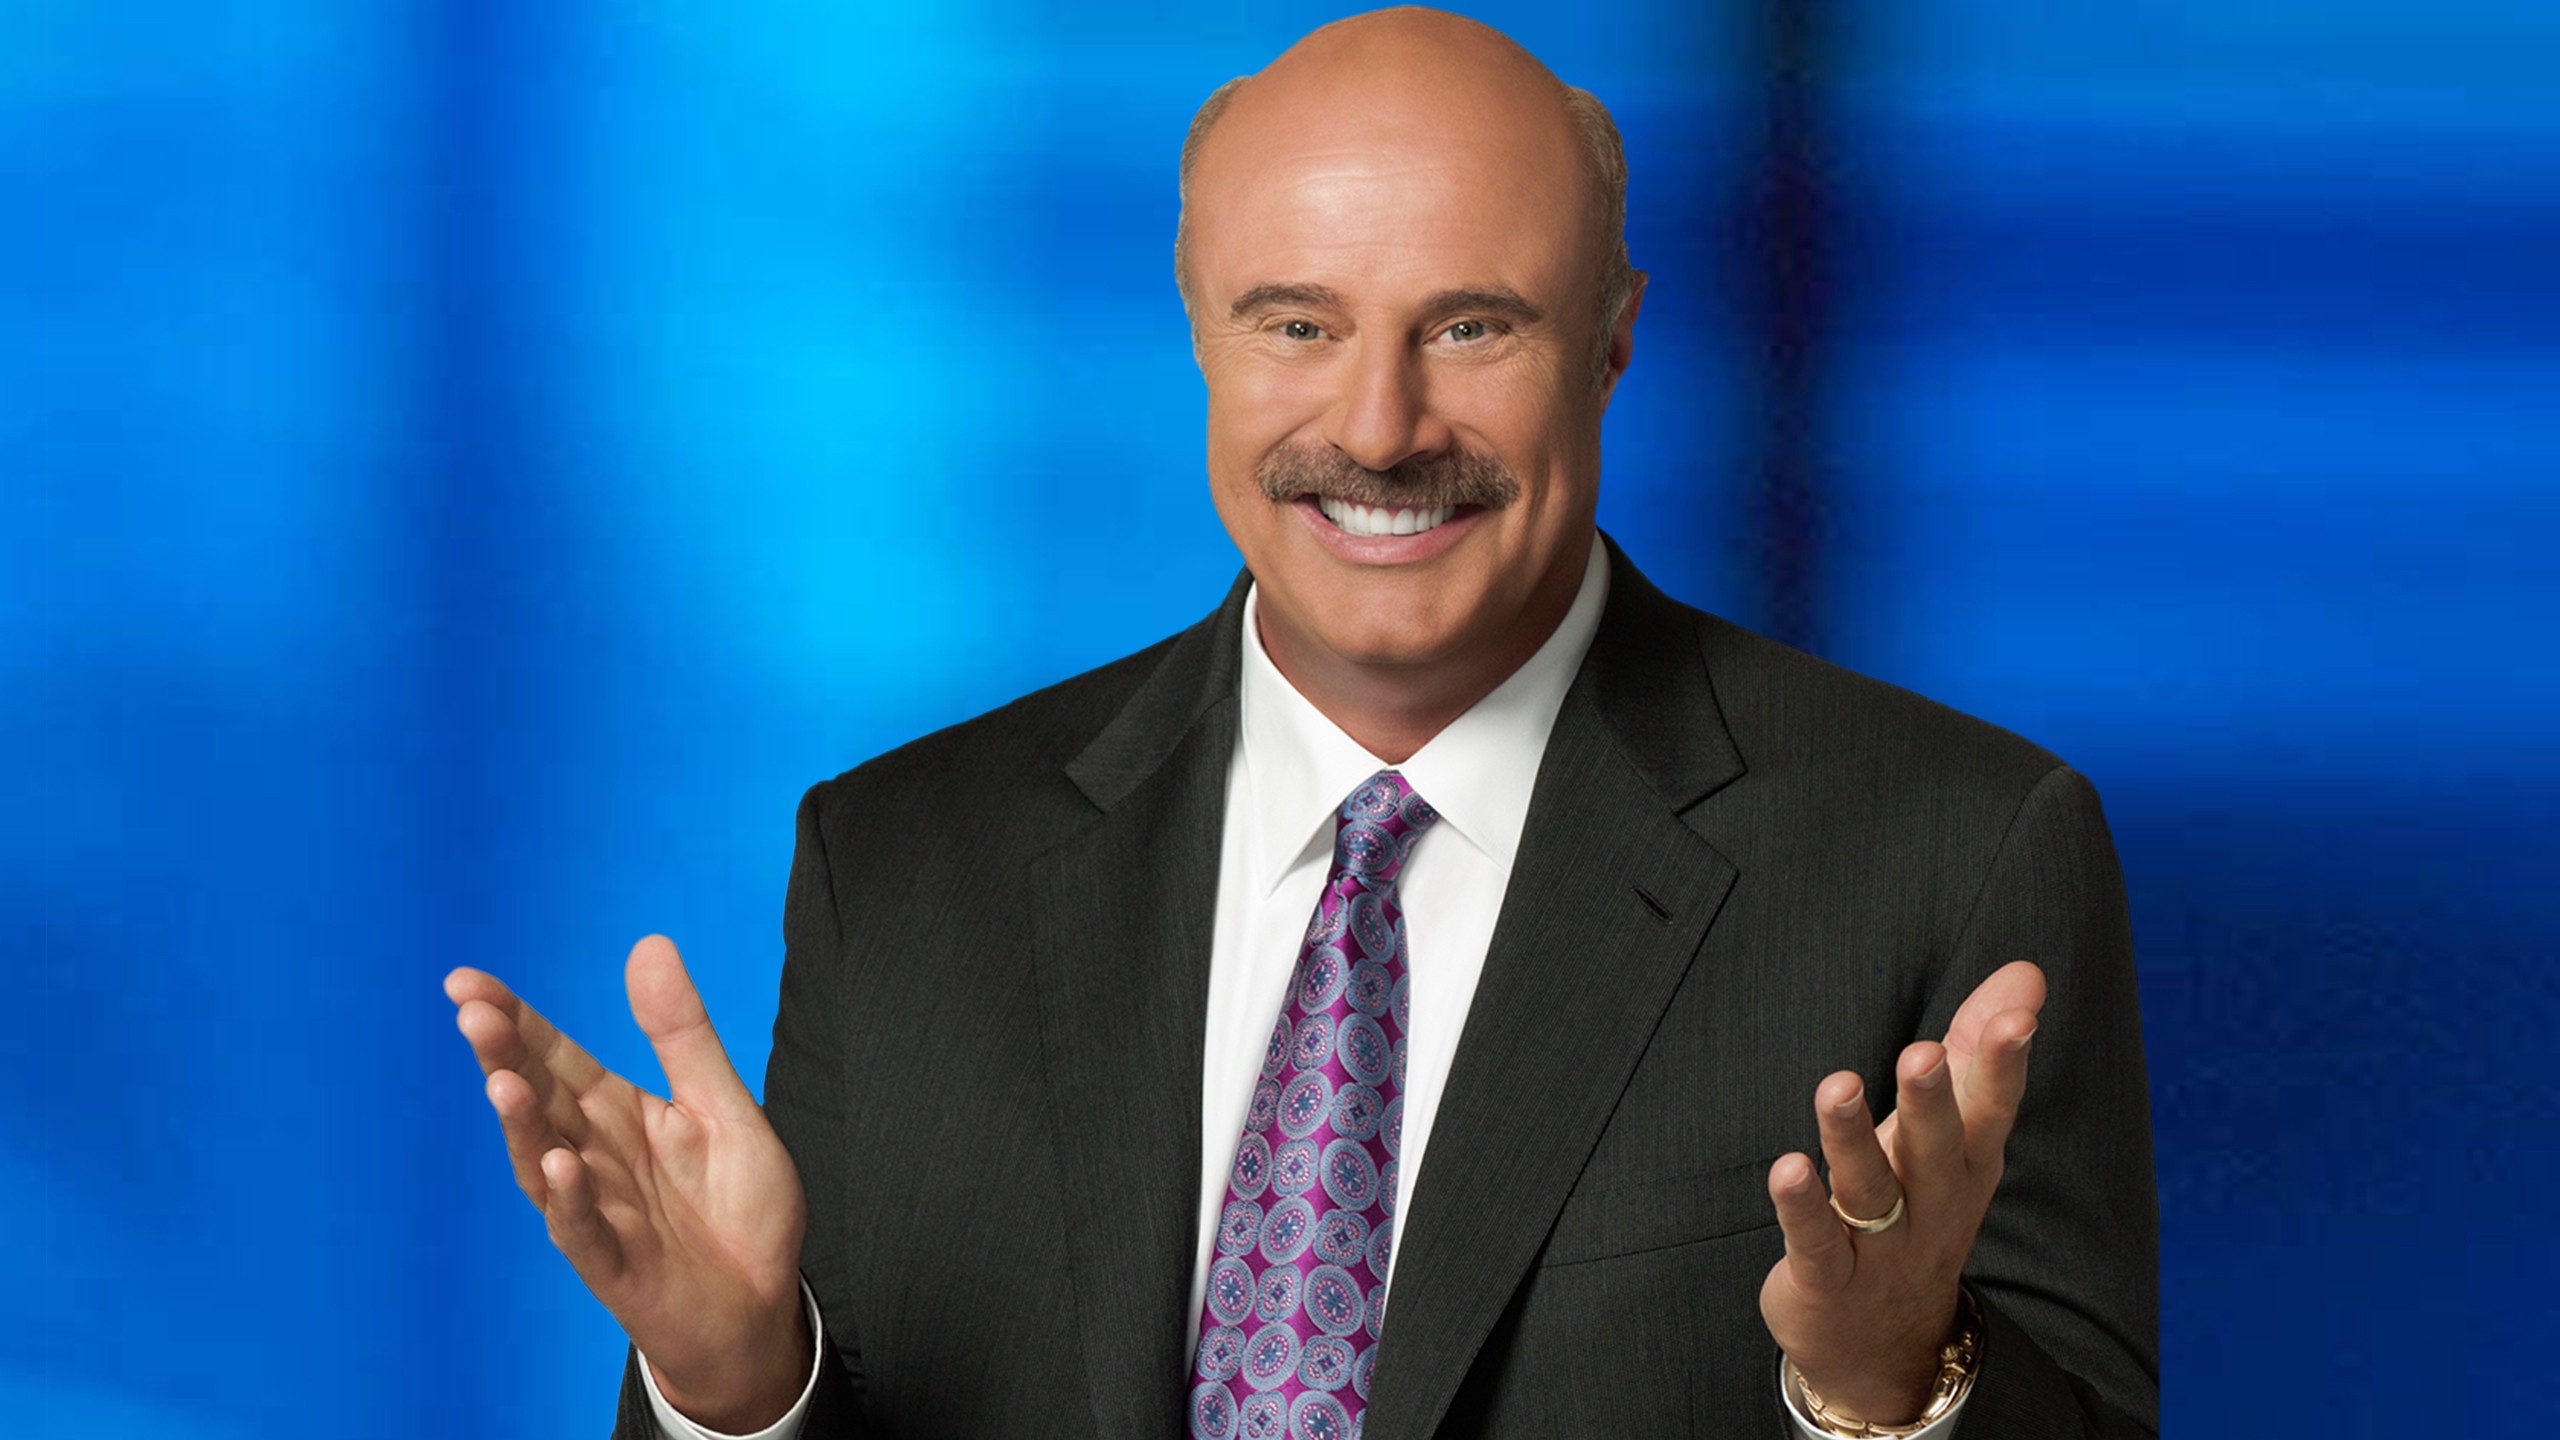 Why did Doctor Phil lose his License